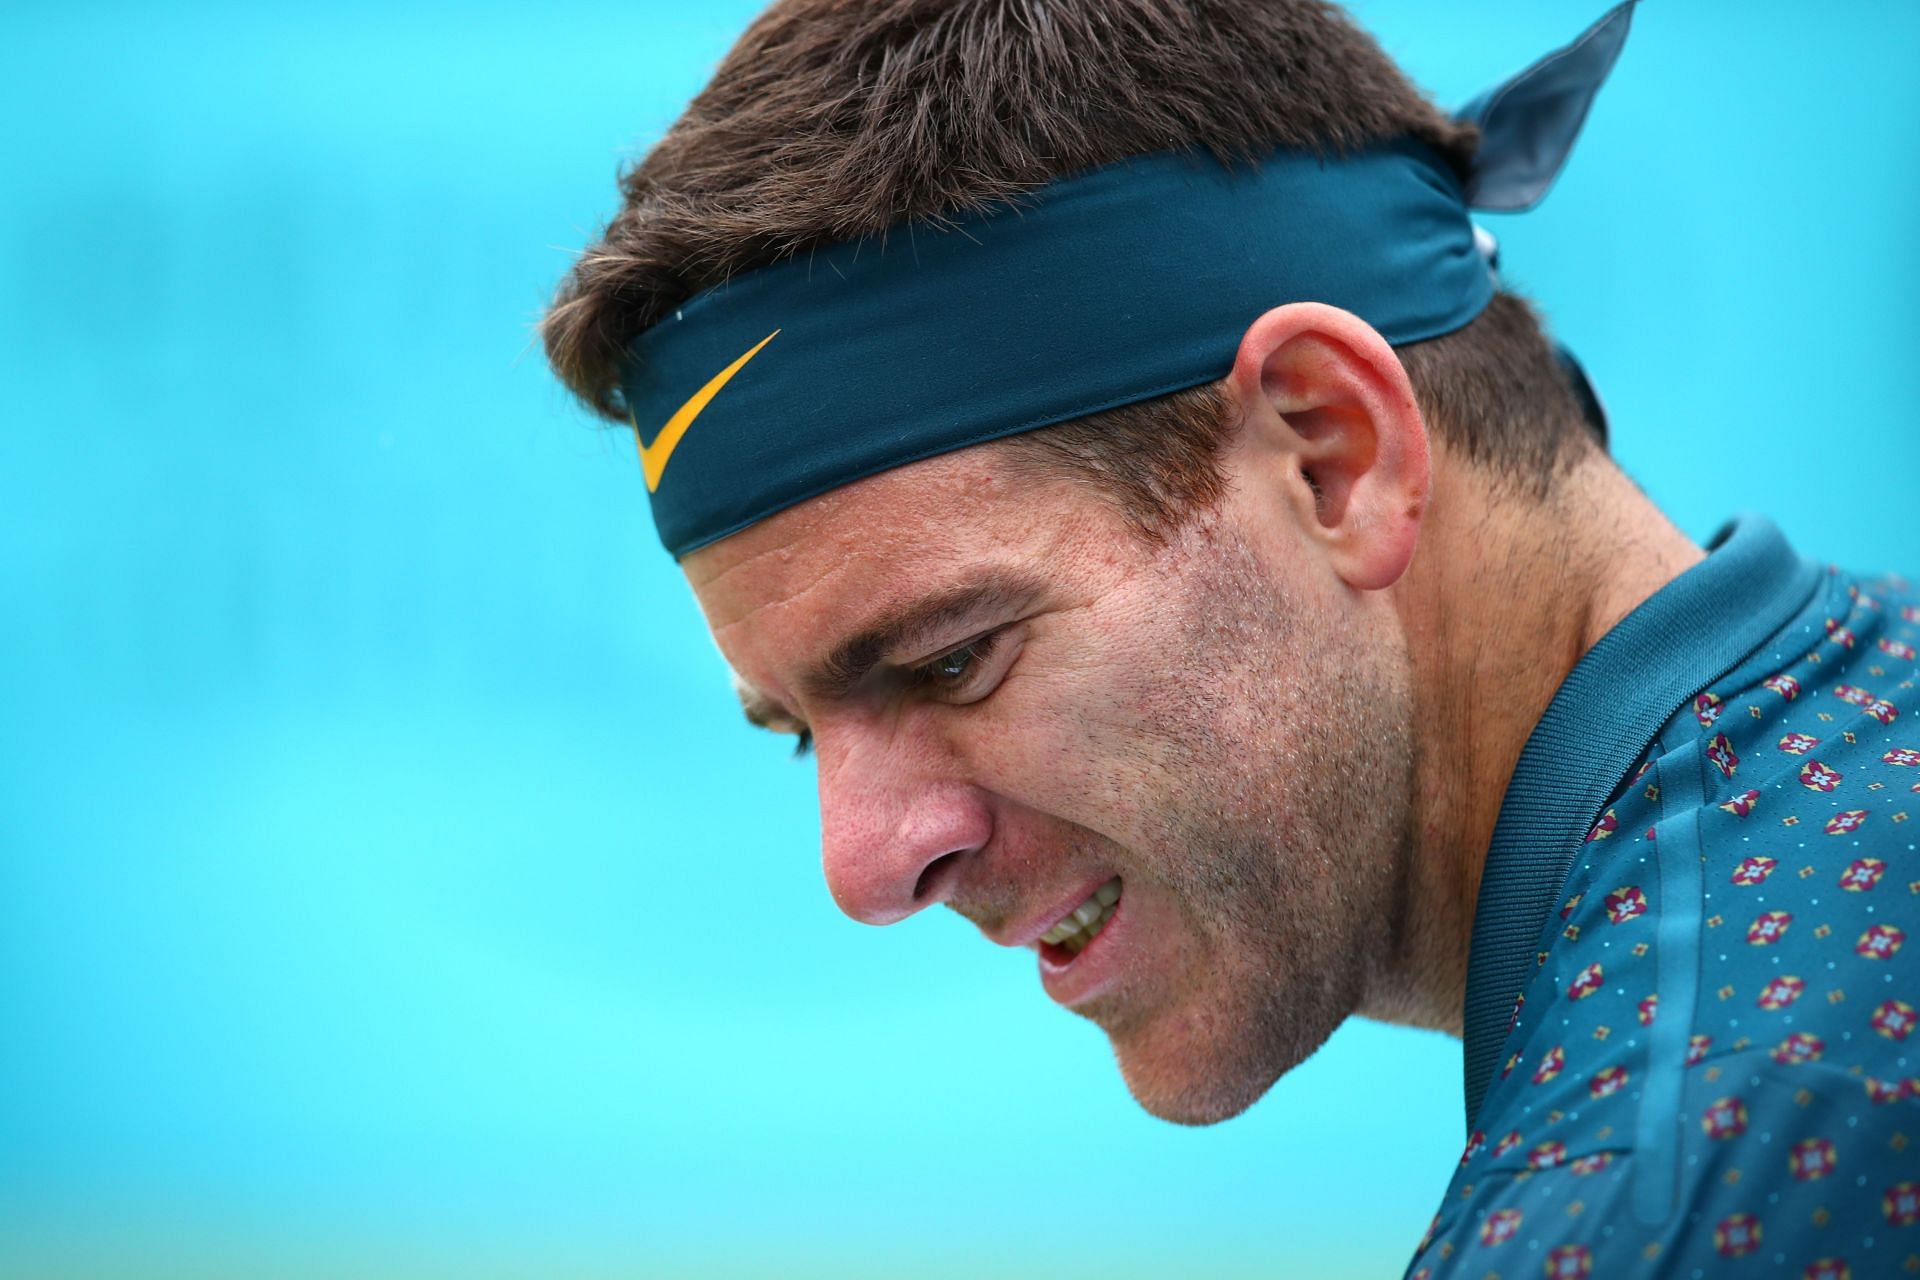 Del Potro last featured in a tournament two years back